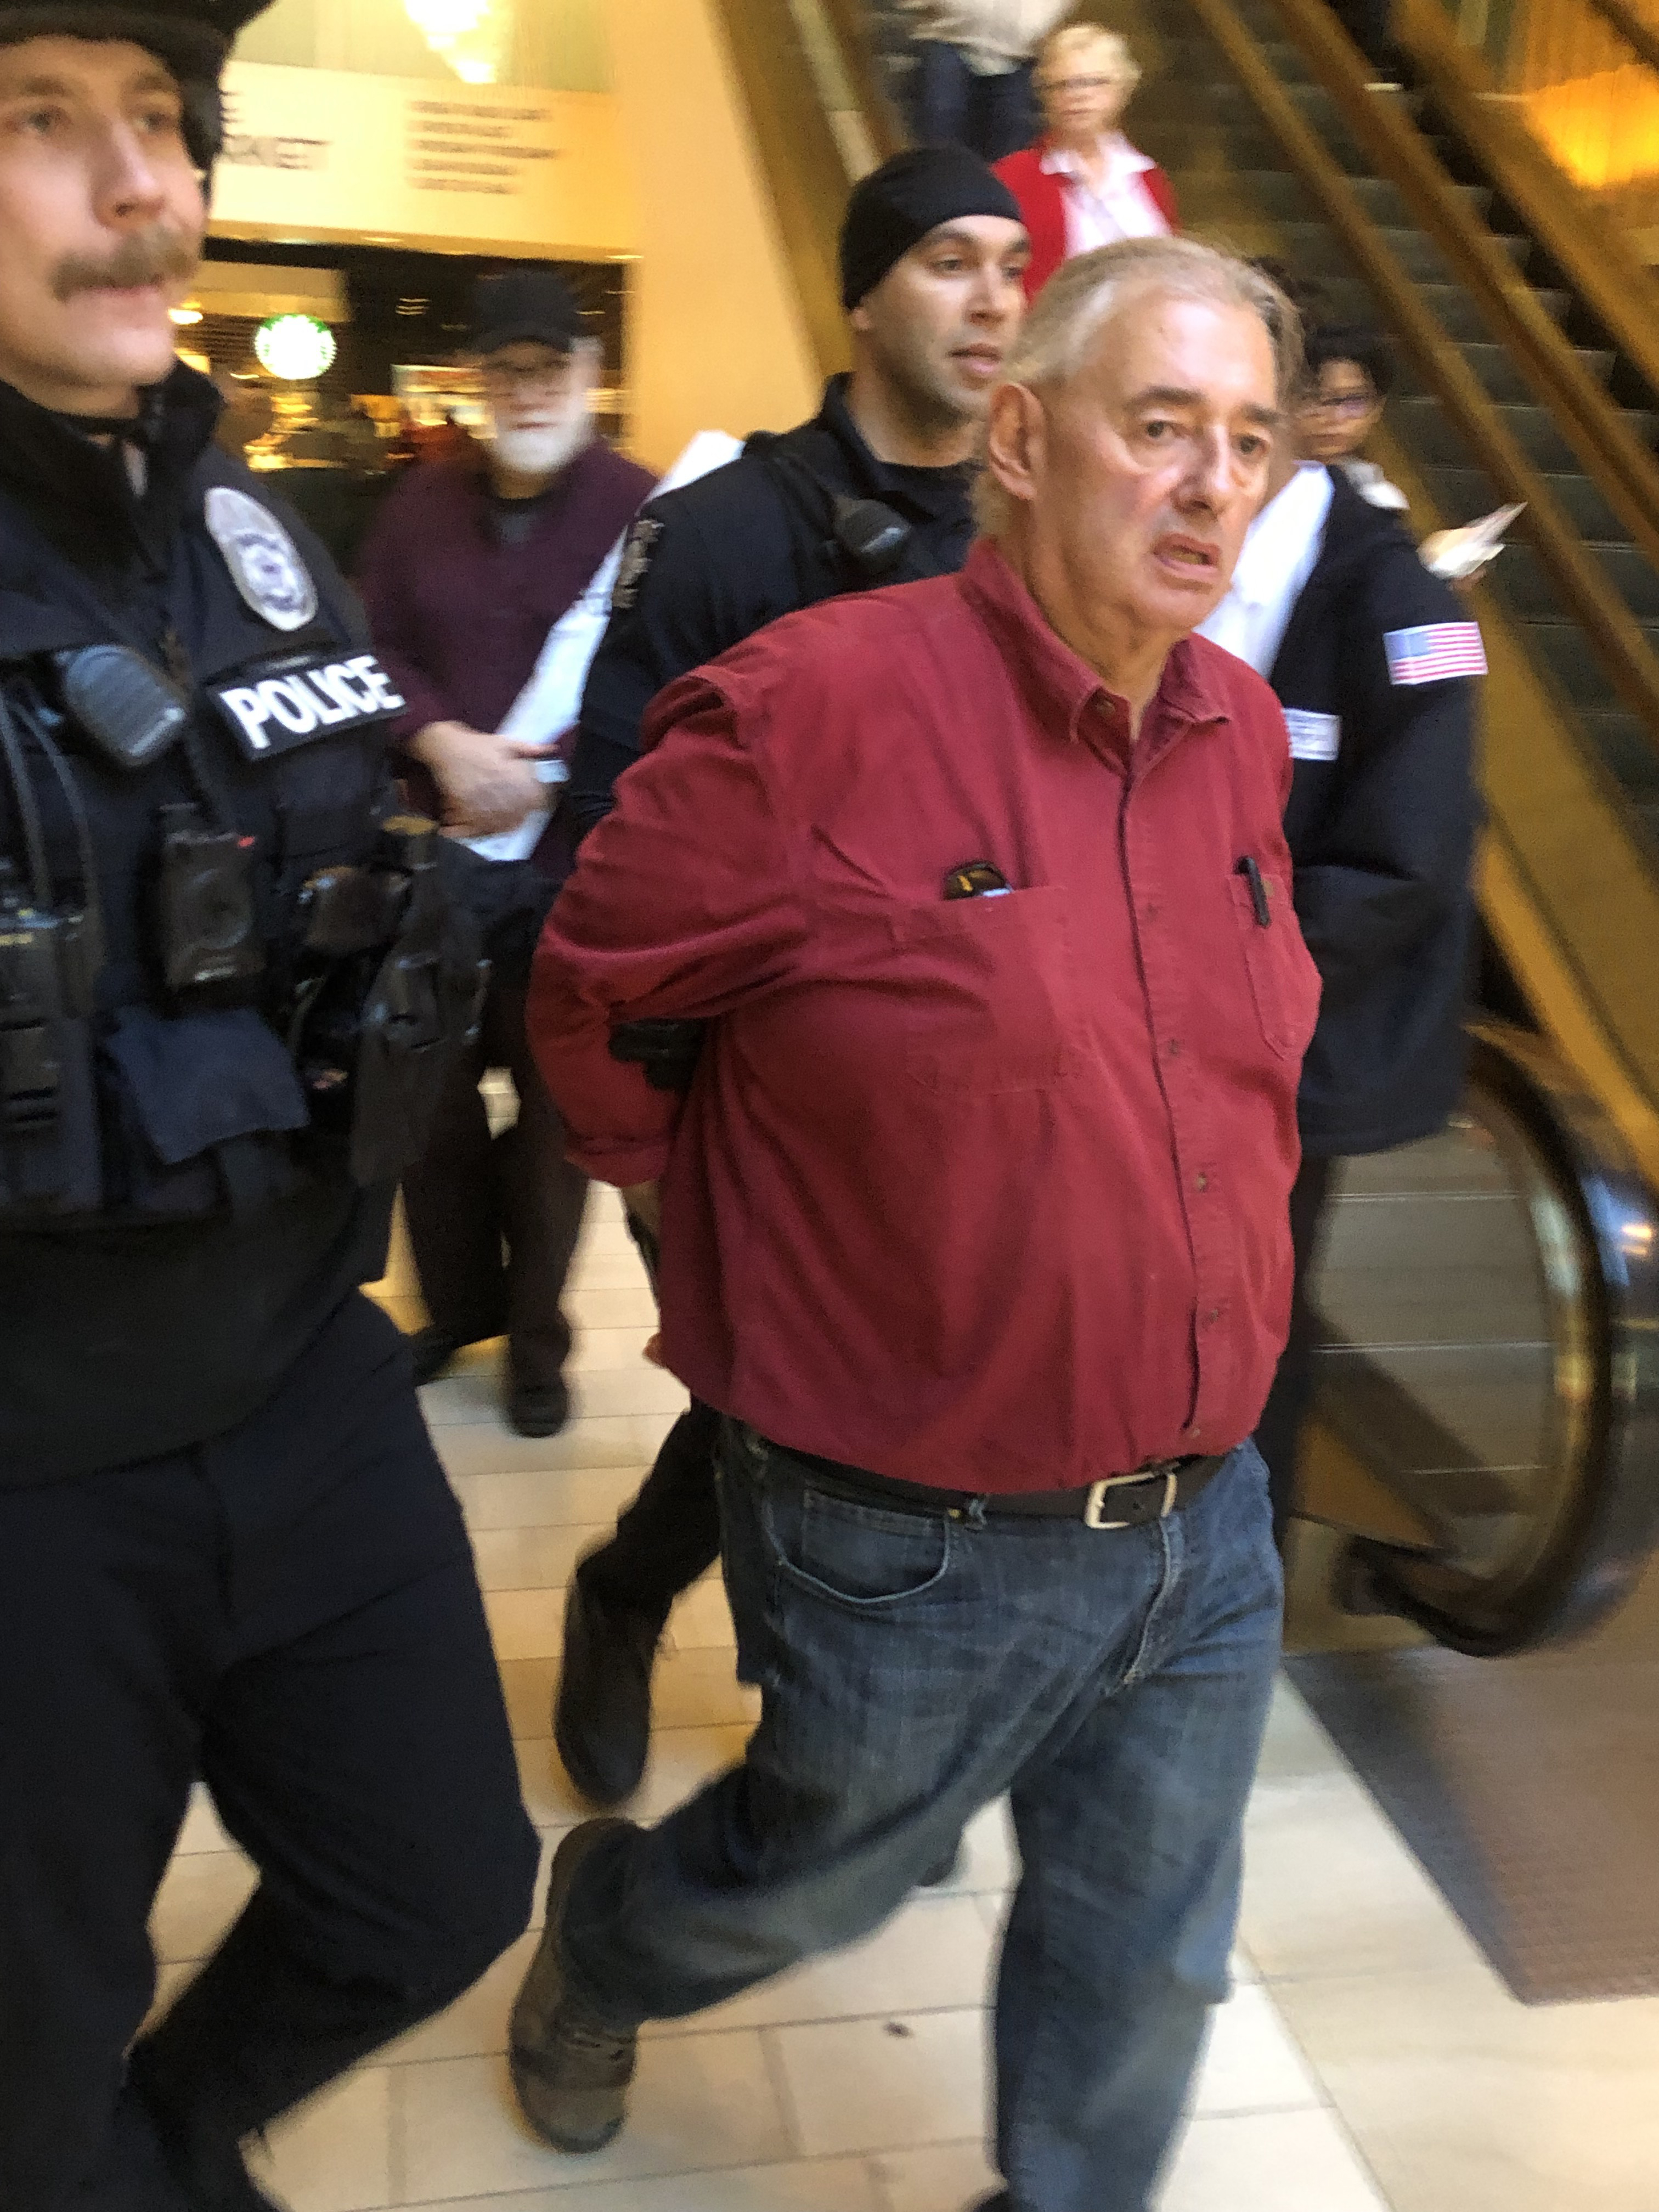 Man in handcuffs with police